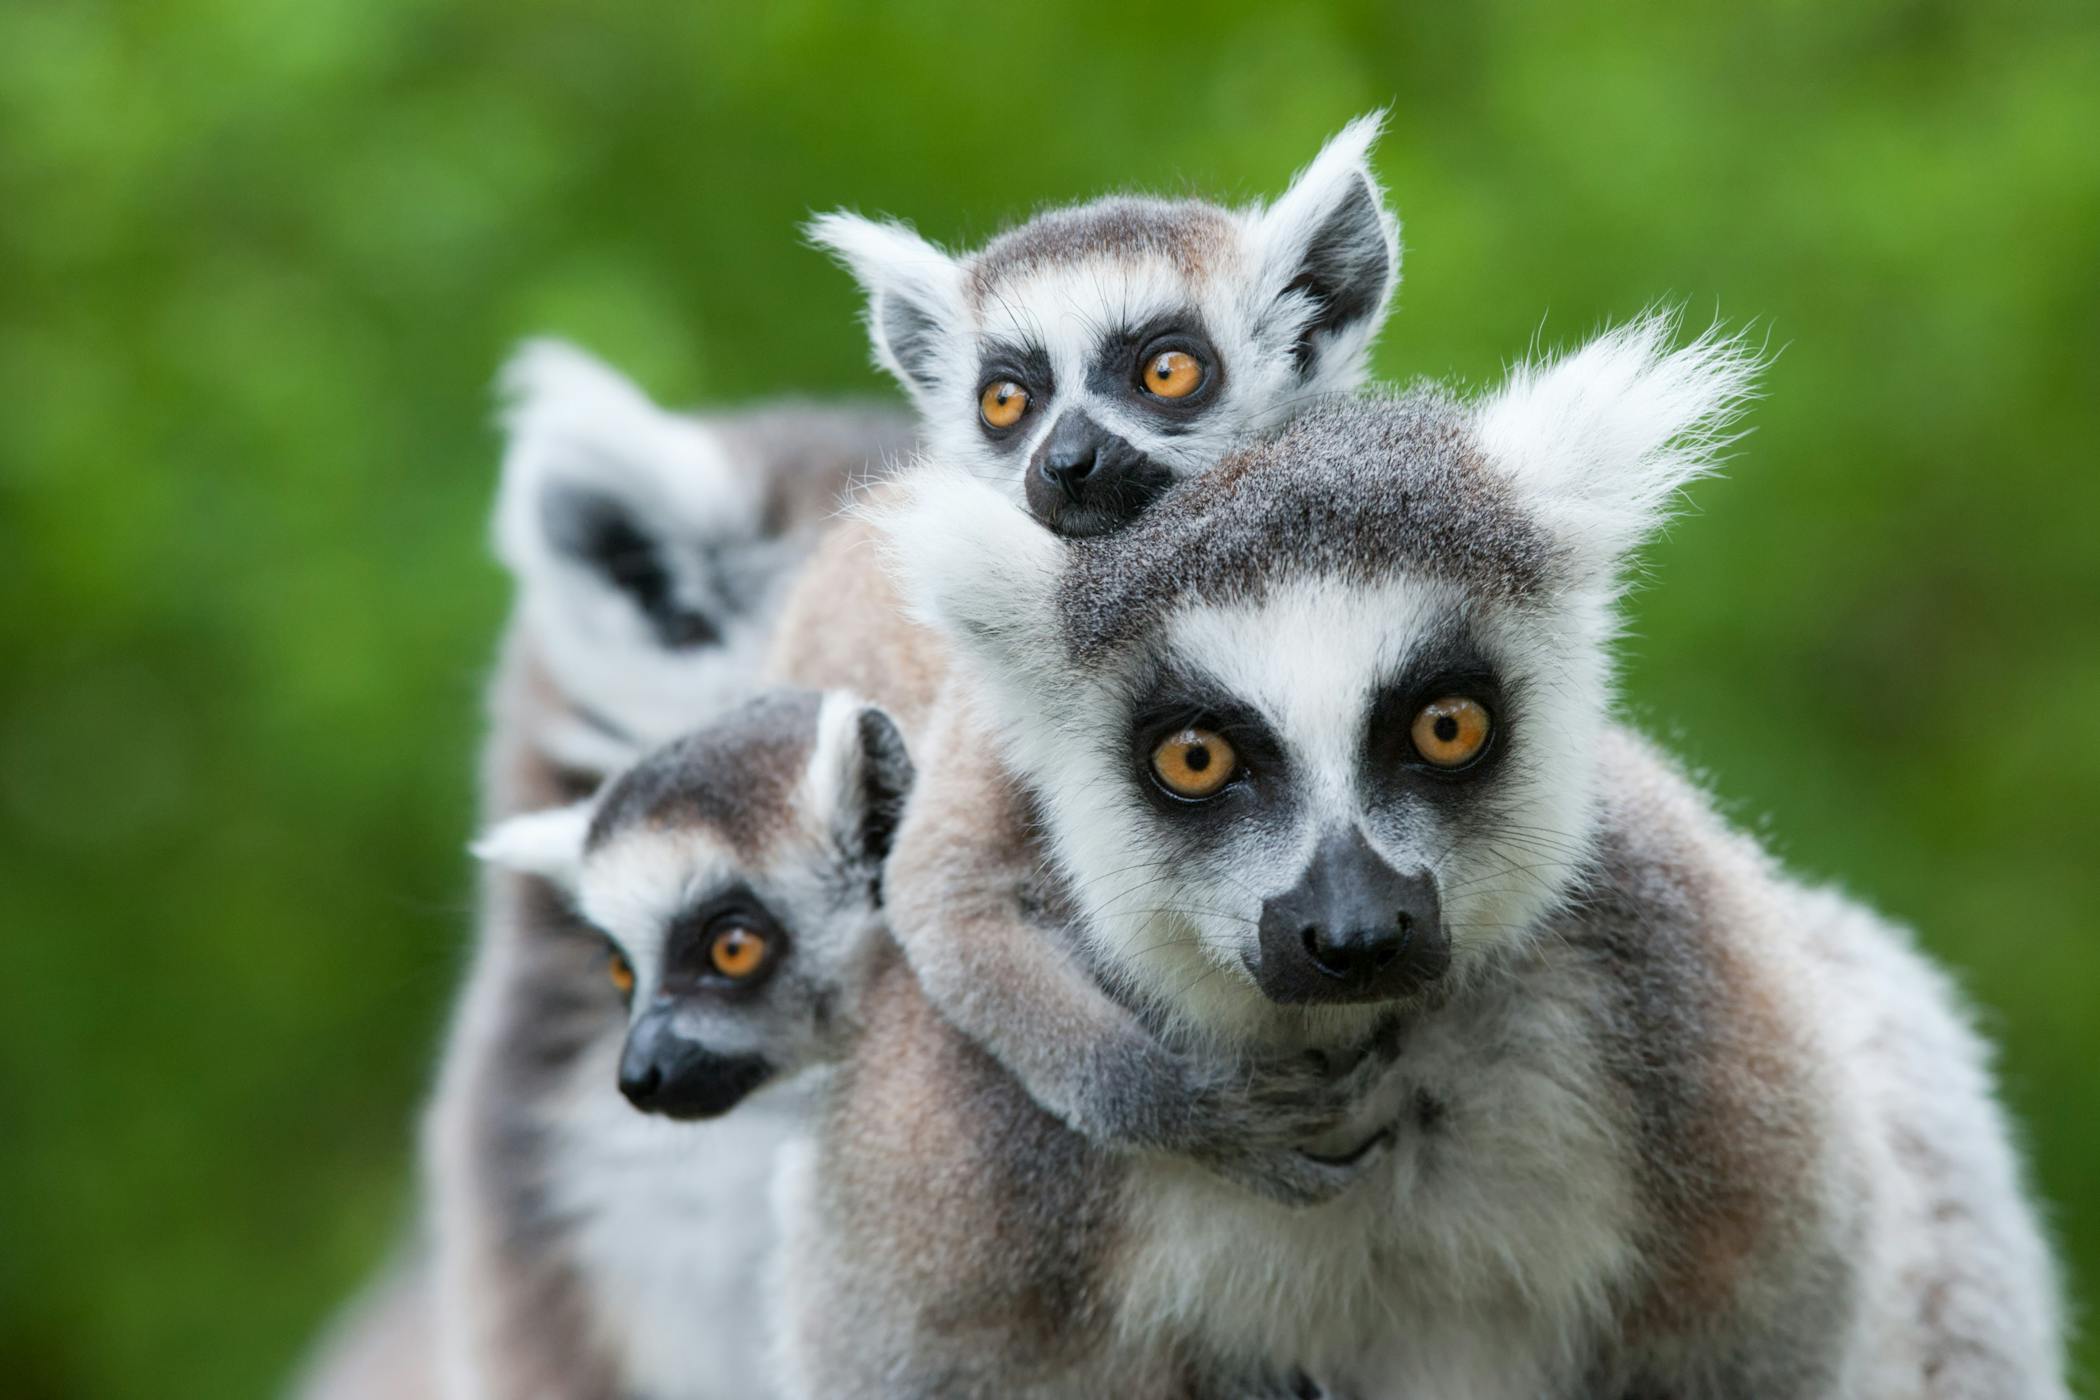 Will you spot the most famous Madagascan resident?